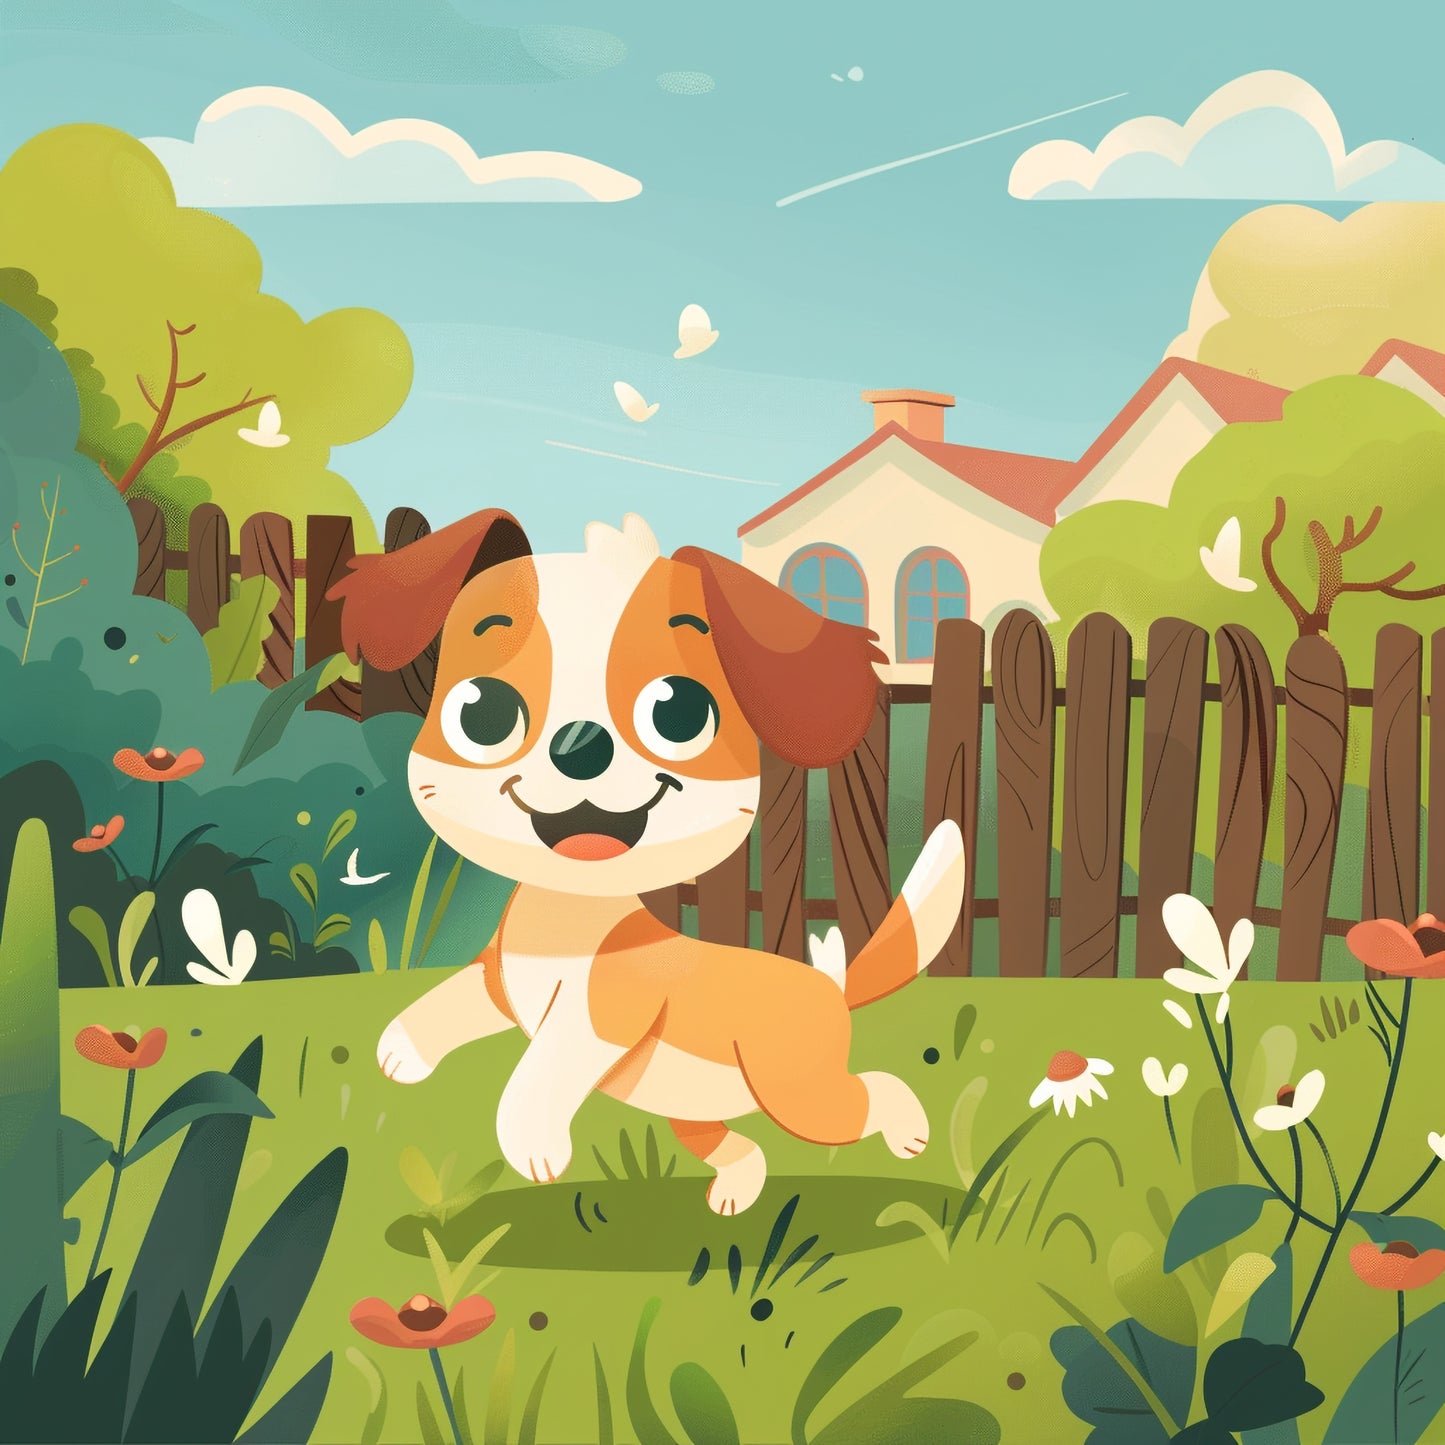 Cheerful Puppy Playing in a Sunny Garden Illustration